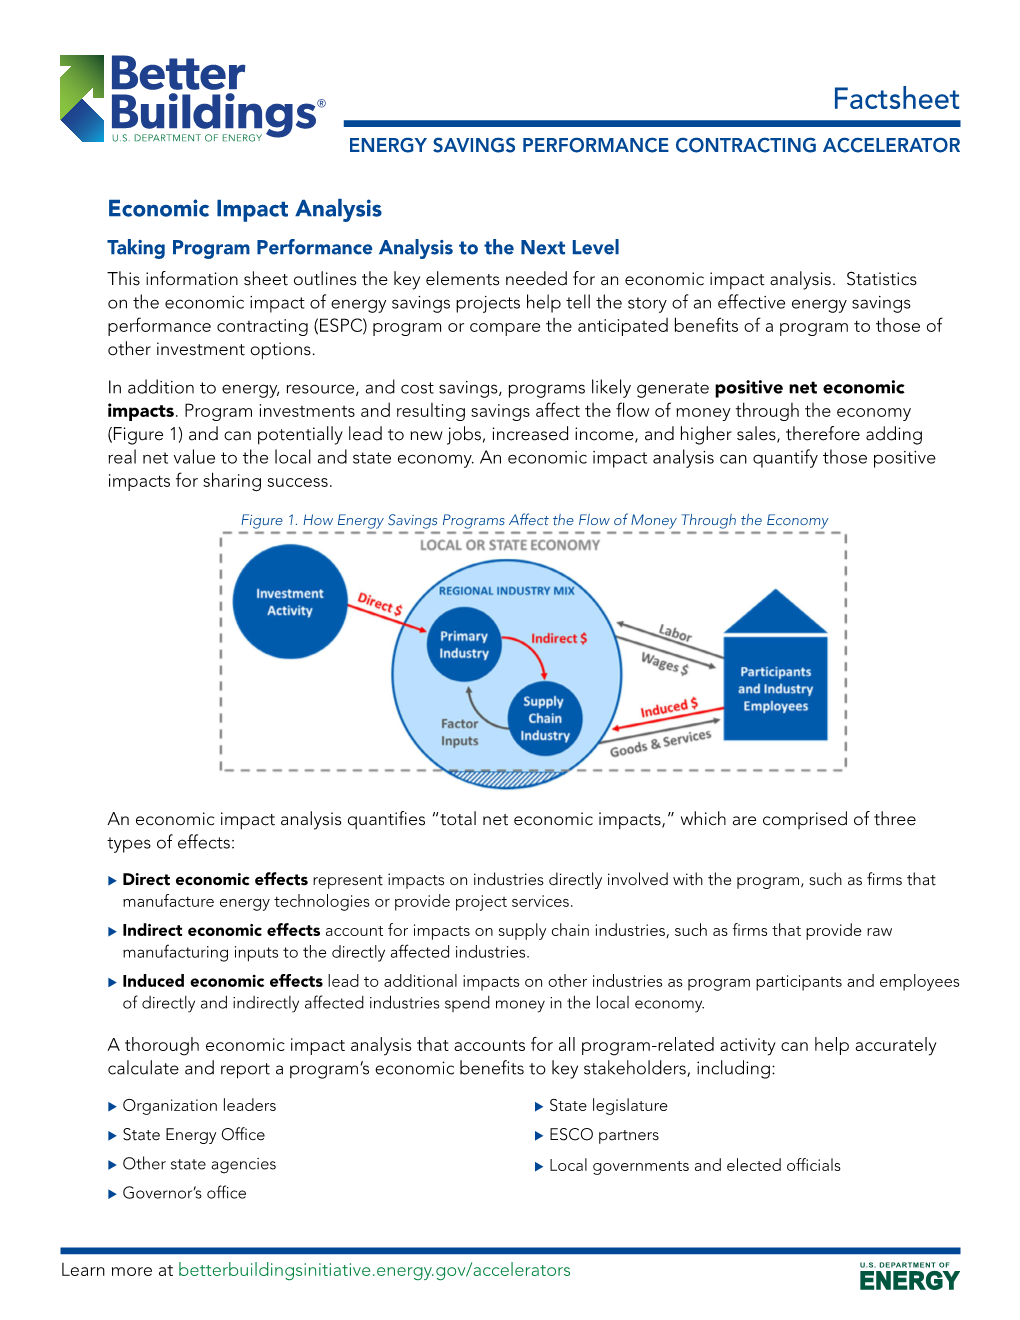 Economic Impact Analysis Taking Program Performance Analysis to the Next Level This Information Sheet Outlines the Key Elements Needed for an Economic Impact Analysis